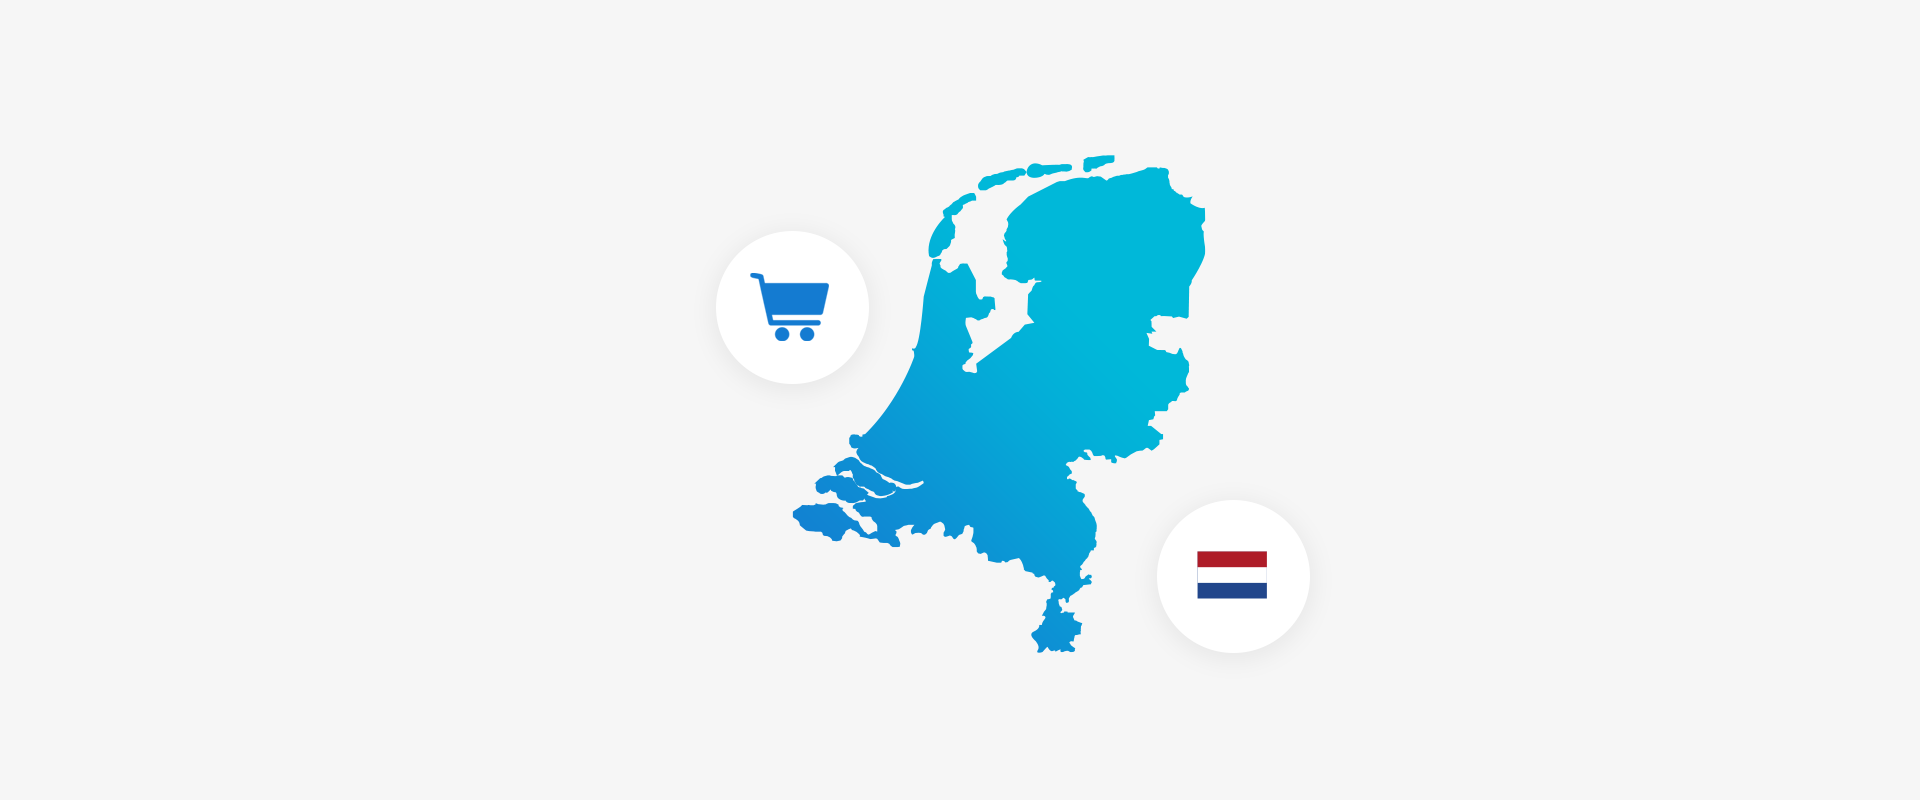 Checkout Habits in the Netherlands